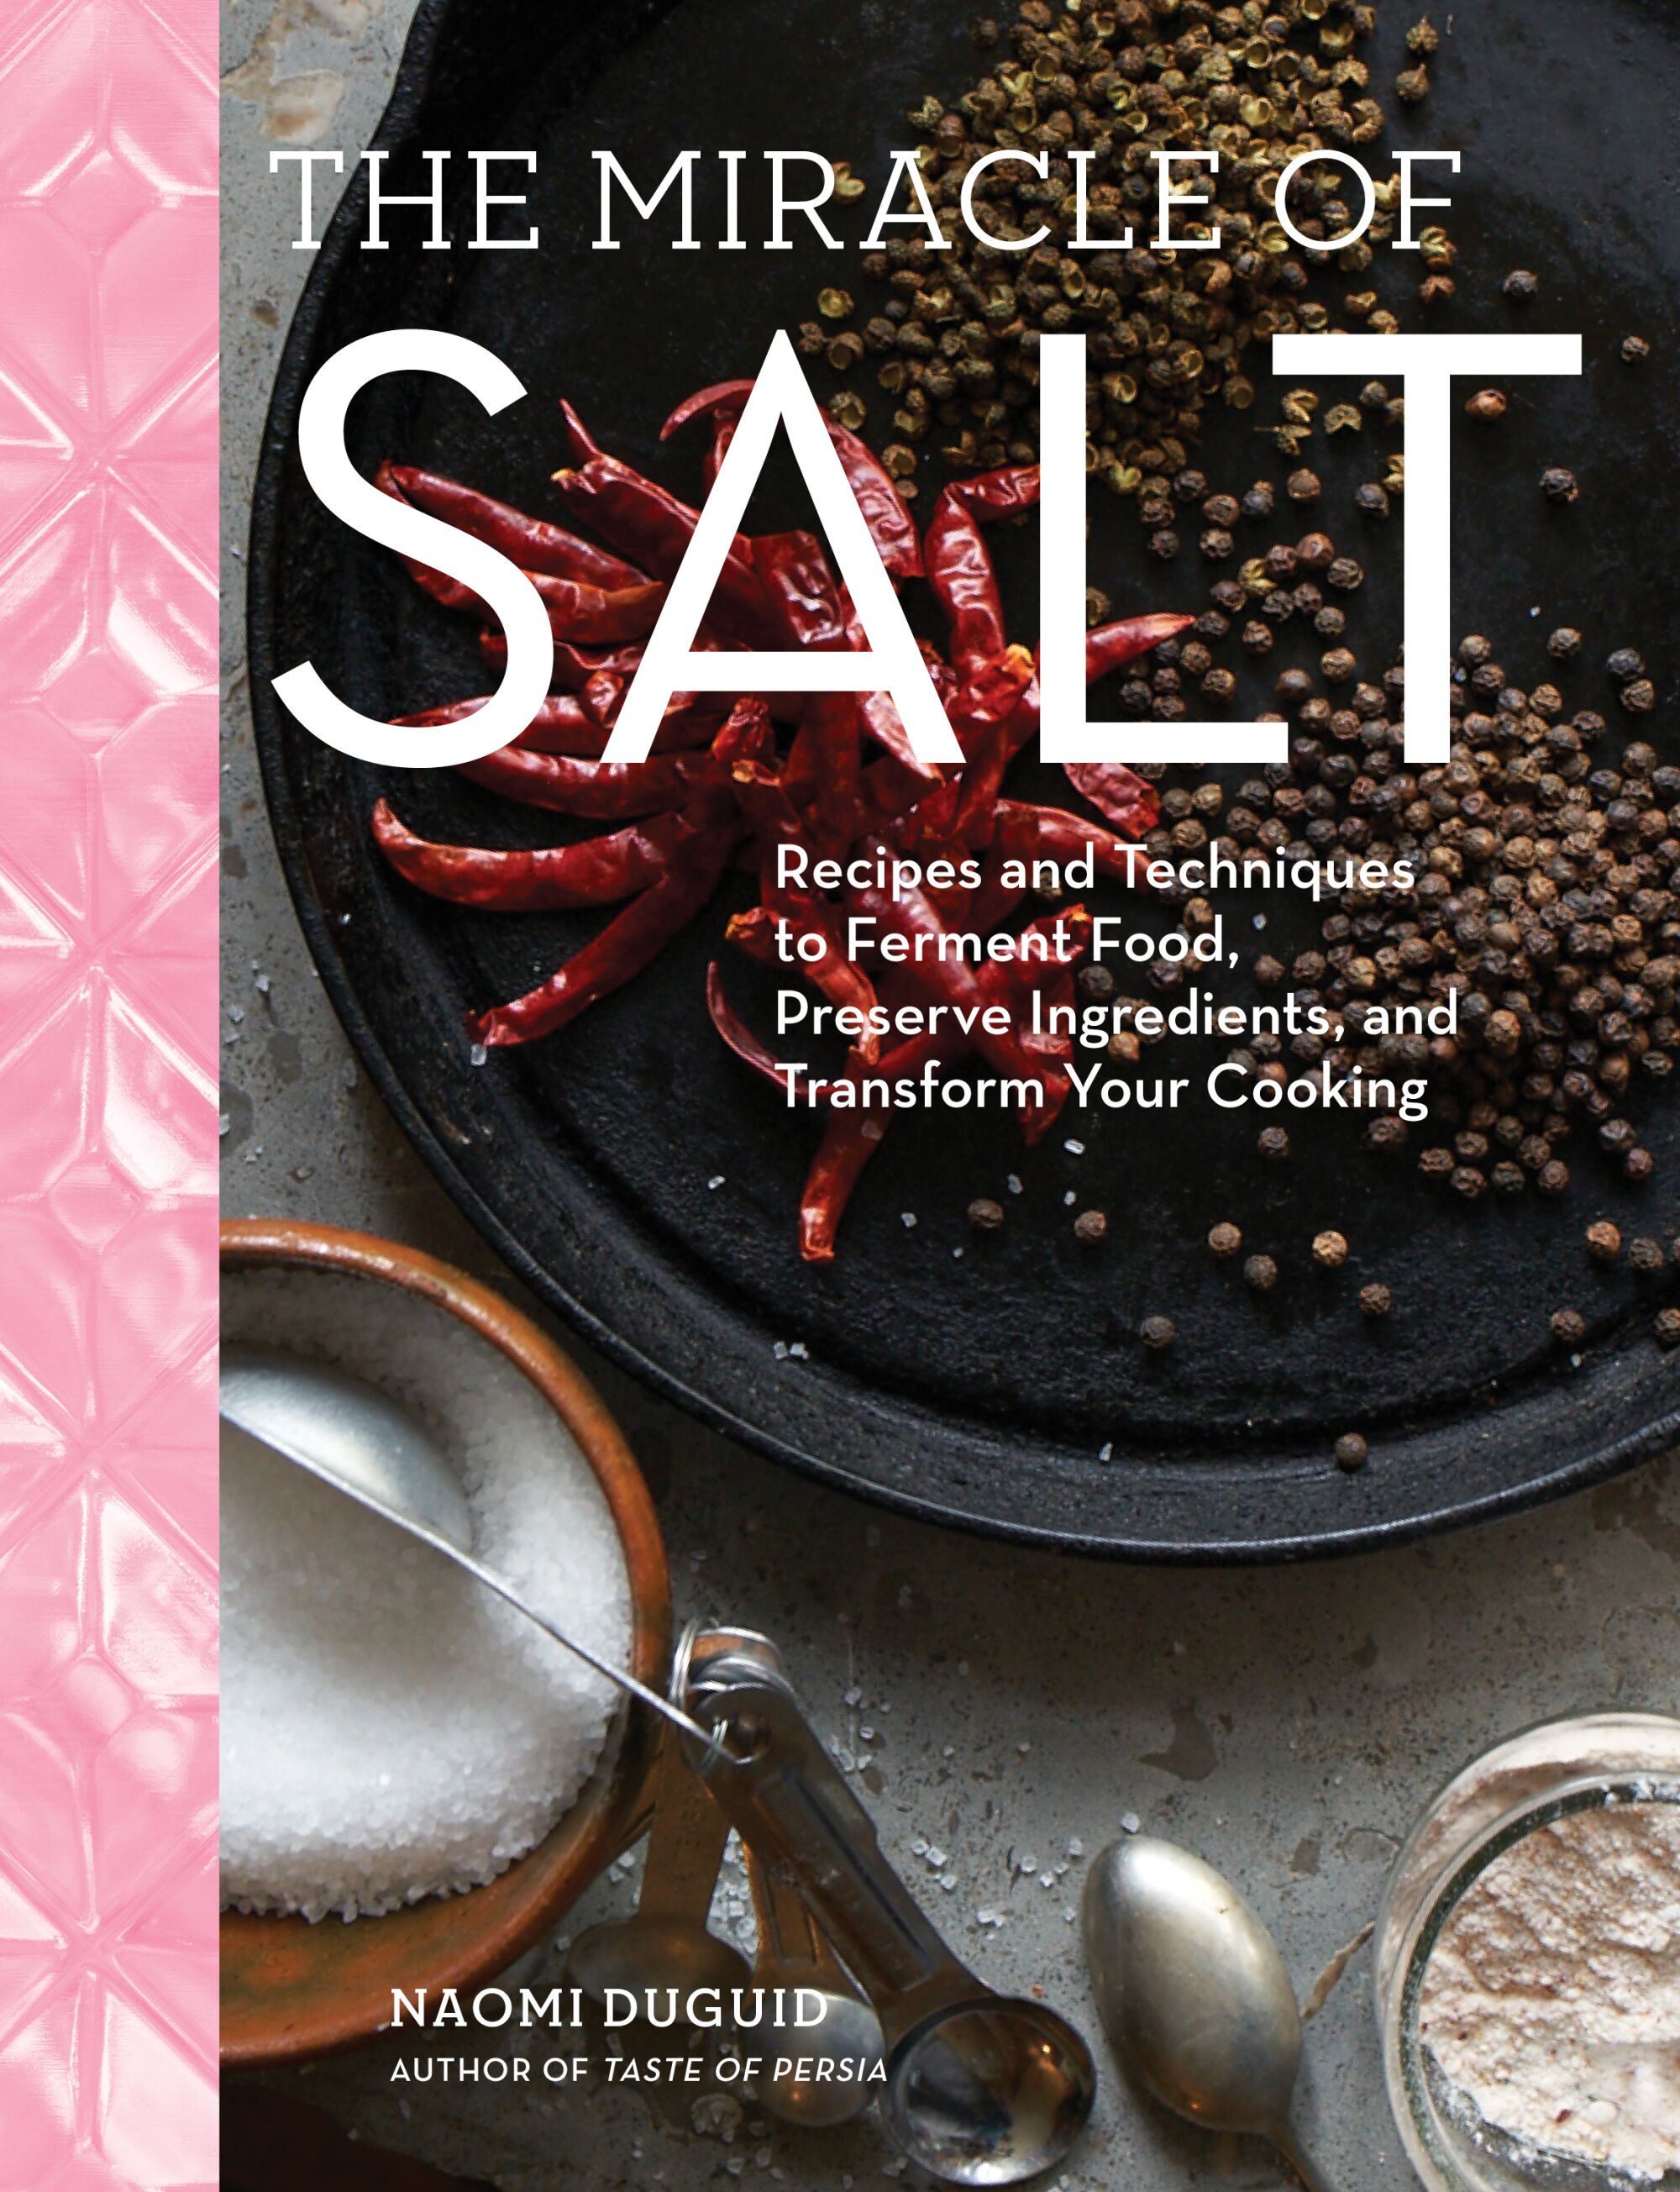 "The Miracle of Salt: Recipes and Techniques" by Naomi Duguid